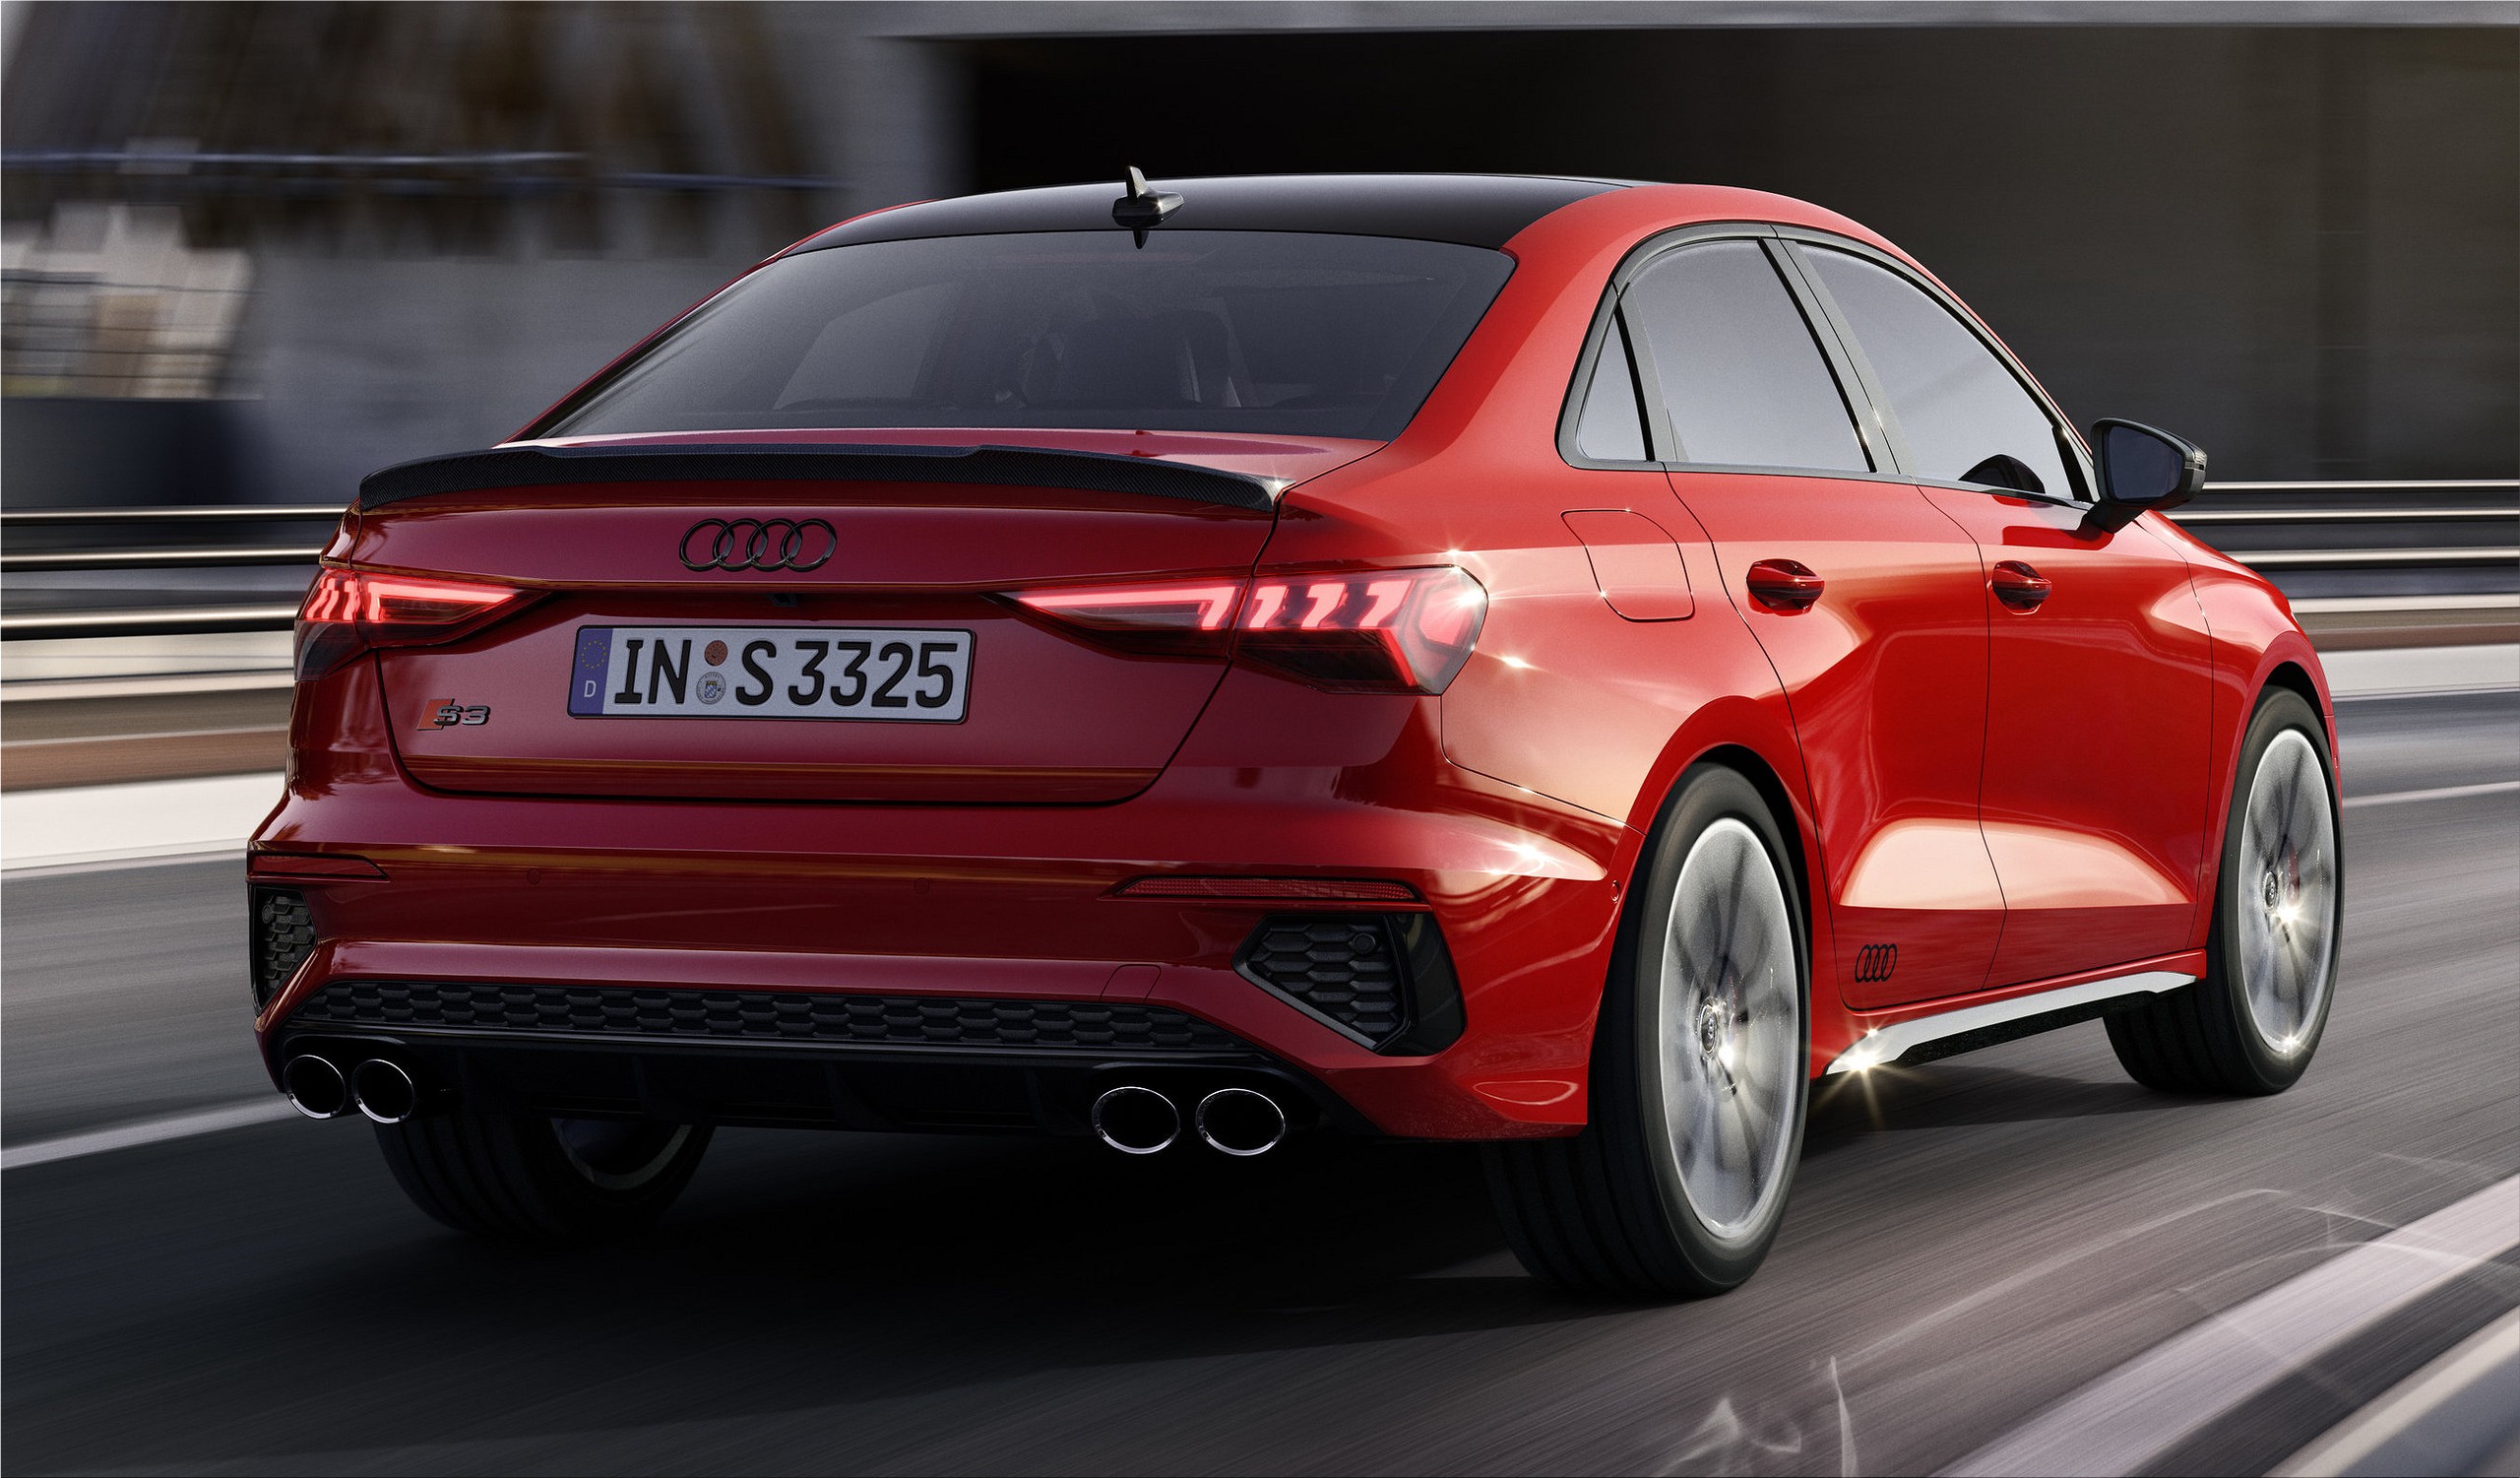 The new Audi S3 Sportback and S3 Sedan technical details and prices